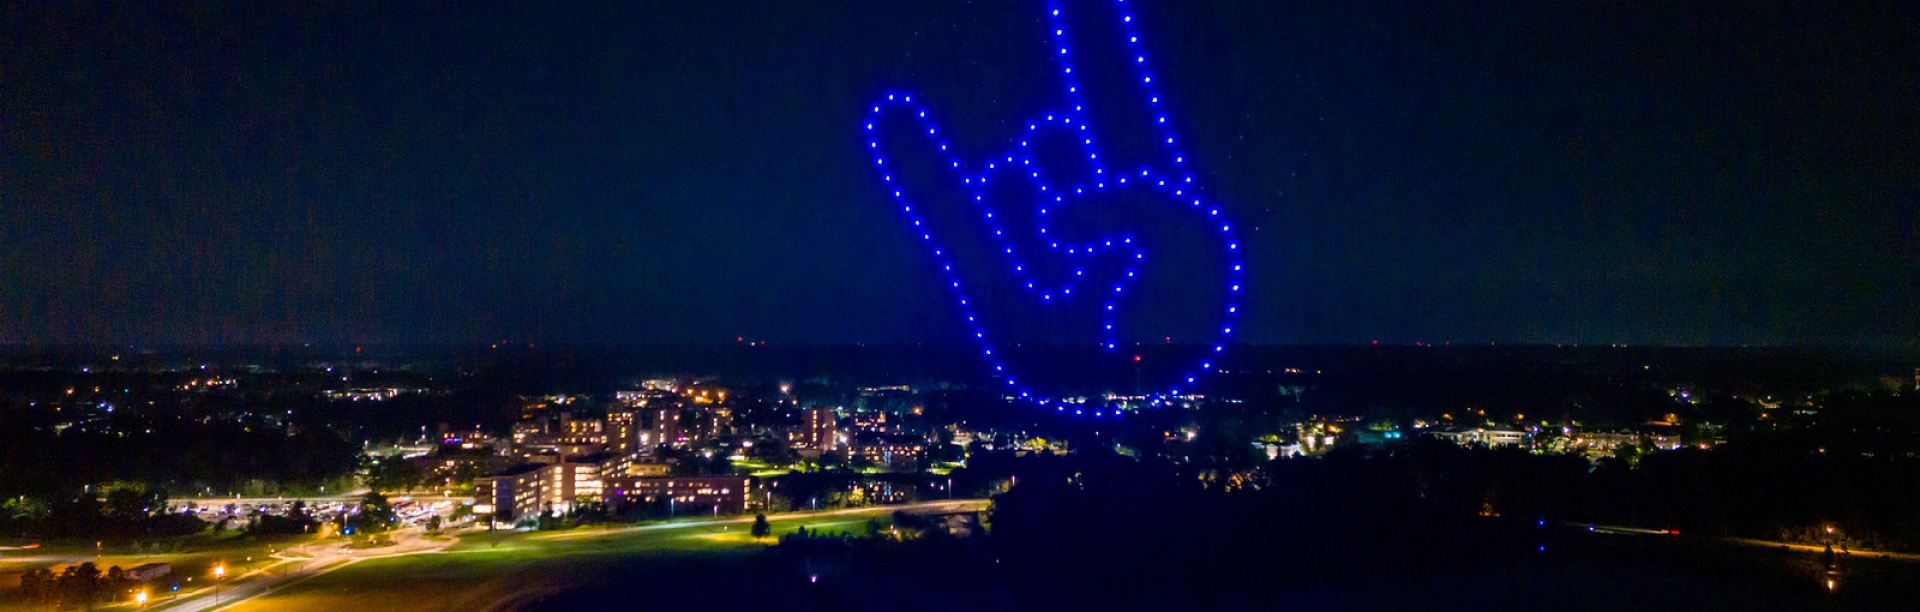 Drones in the night sky in shape of UB horns upduring Welcome Back Blast Pep Rally on the Student Union Field. 